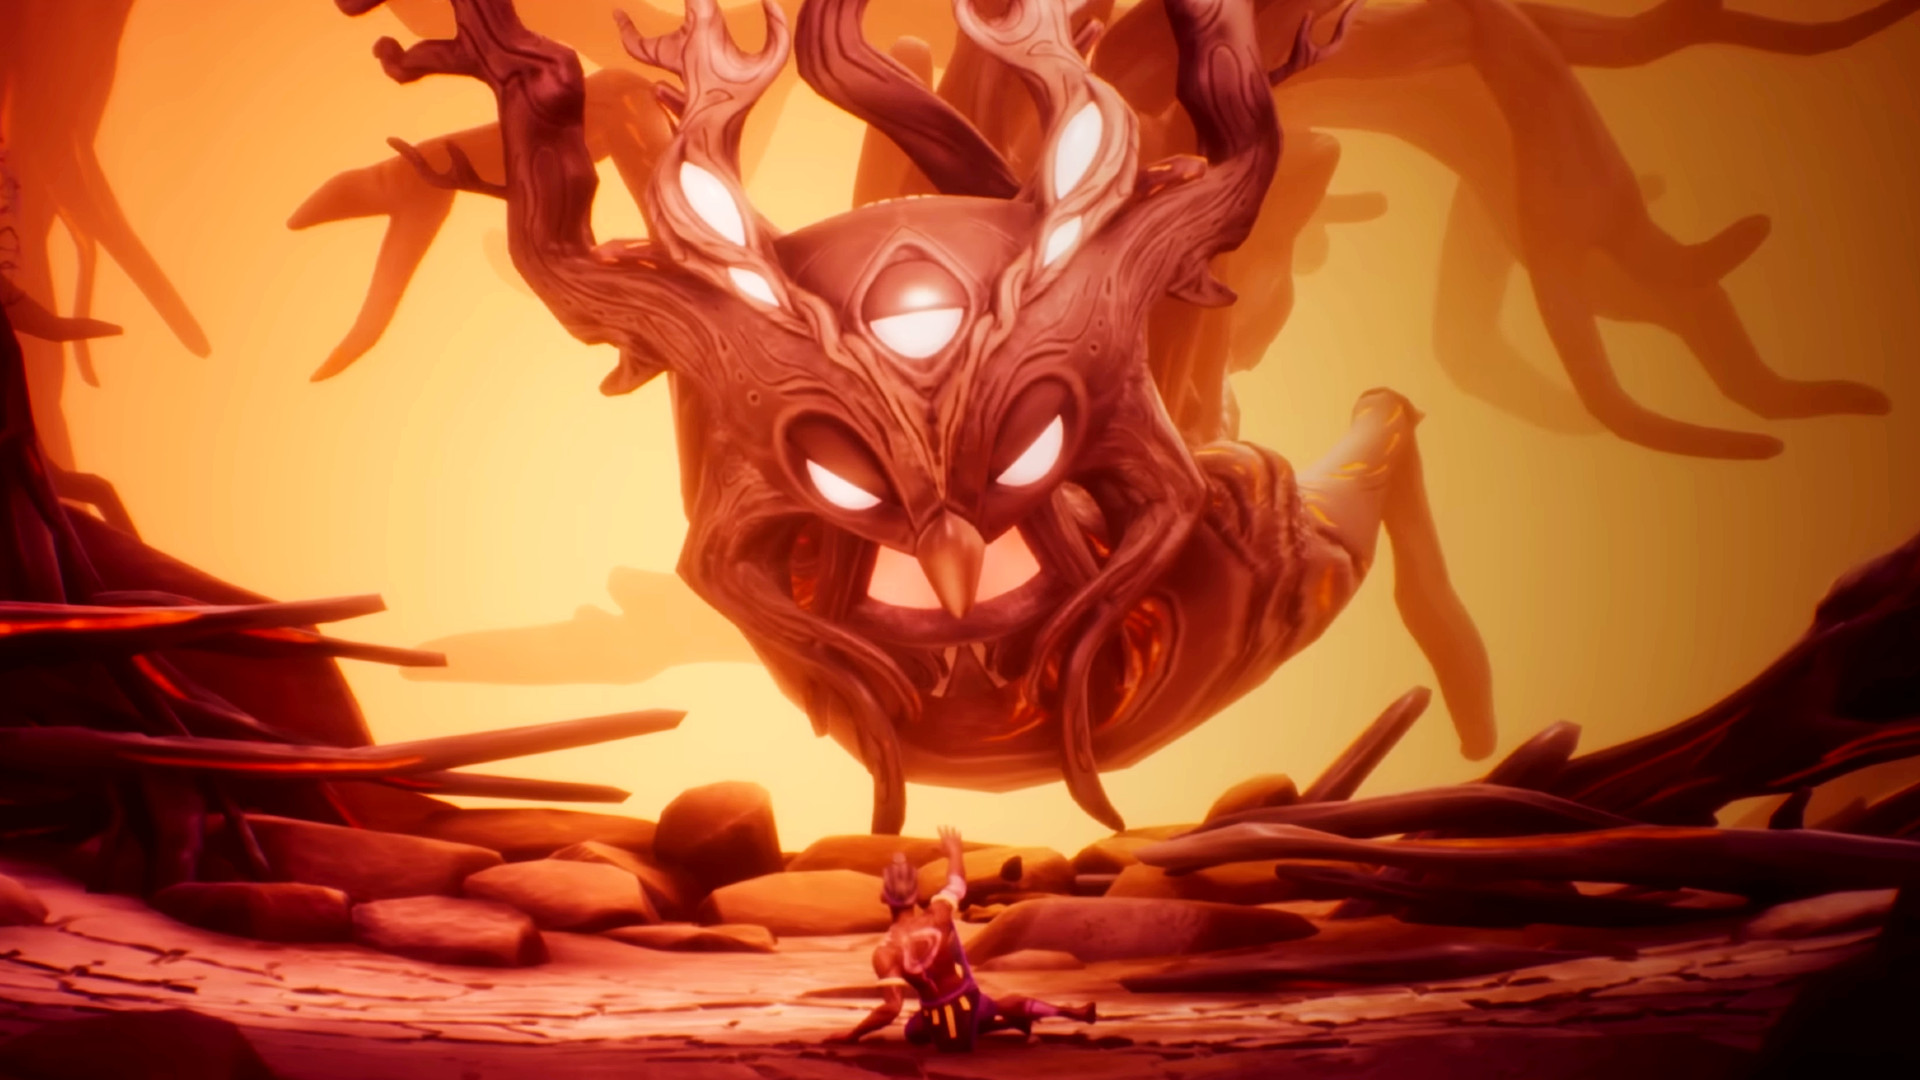 This stunning new Metroidvania game just arrived on Steam, but nobody is playing it - PCGamesN